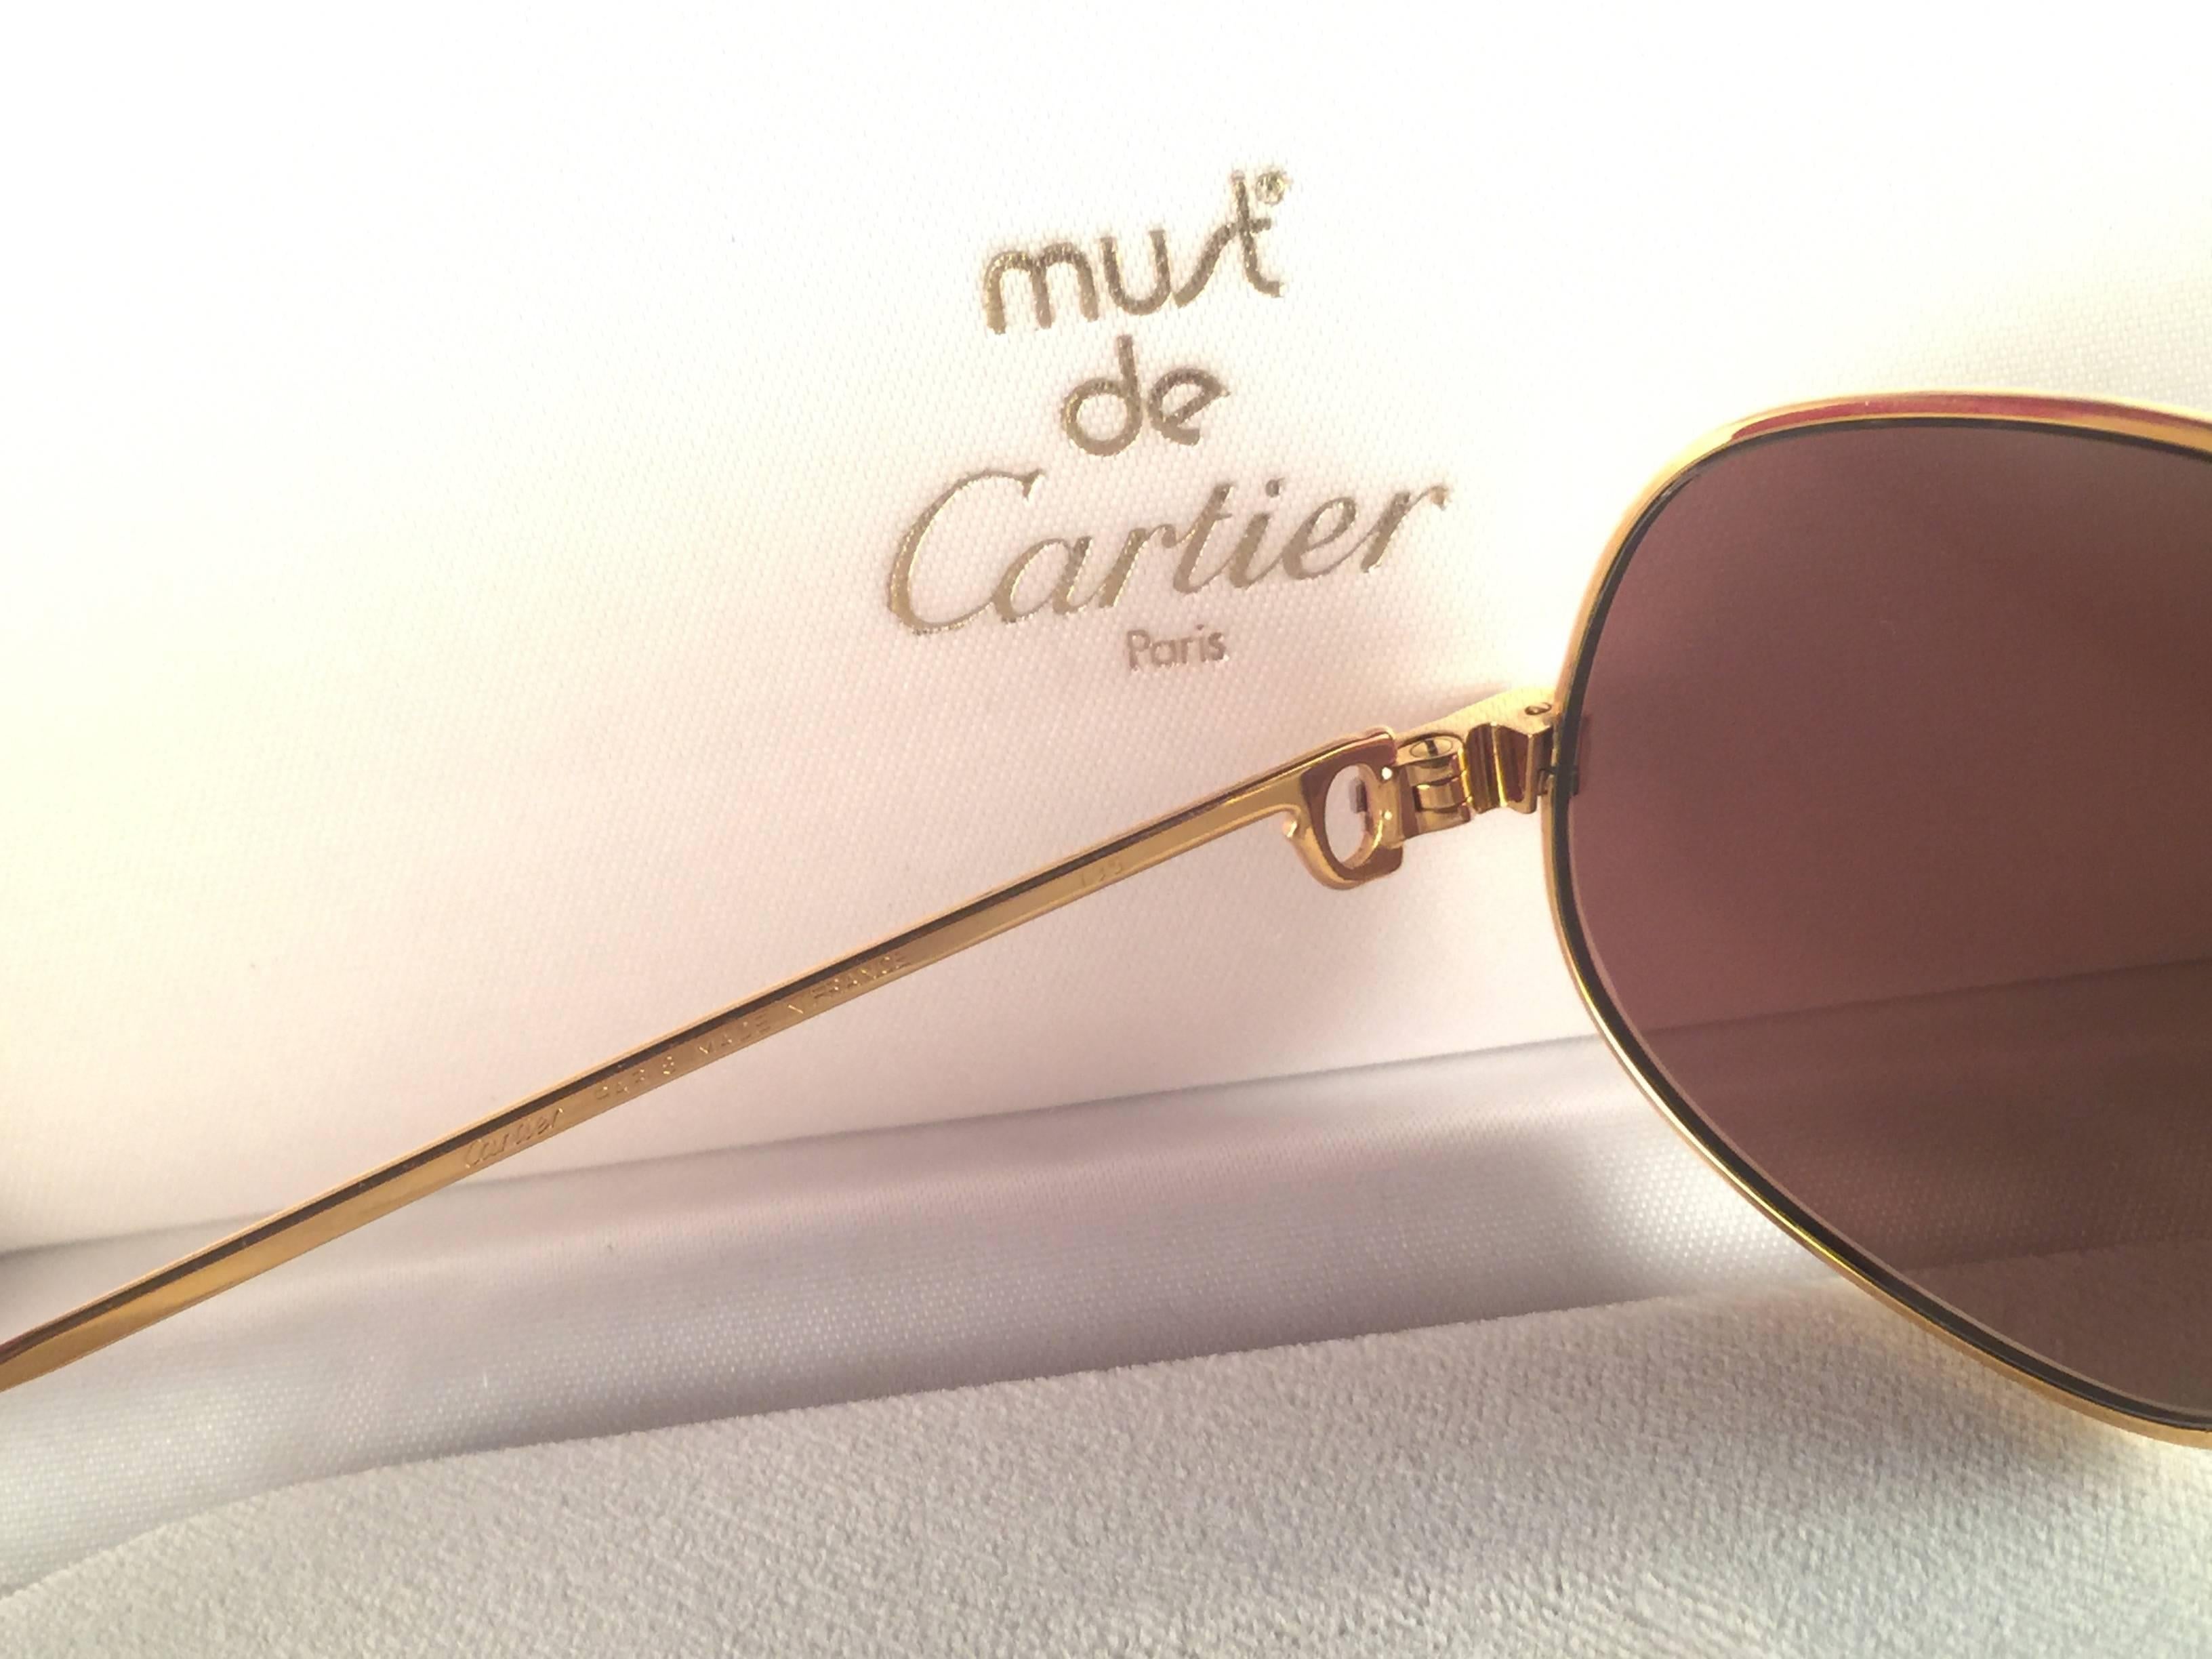 New Vintage Cartier Panthere 56mm Medium Sunglasses France 18k Gold Heavy Plated 3